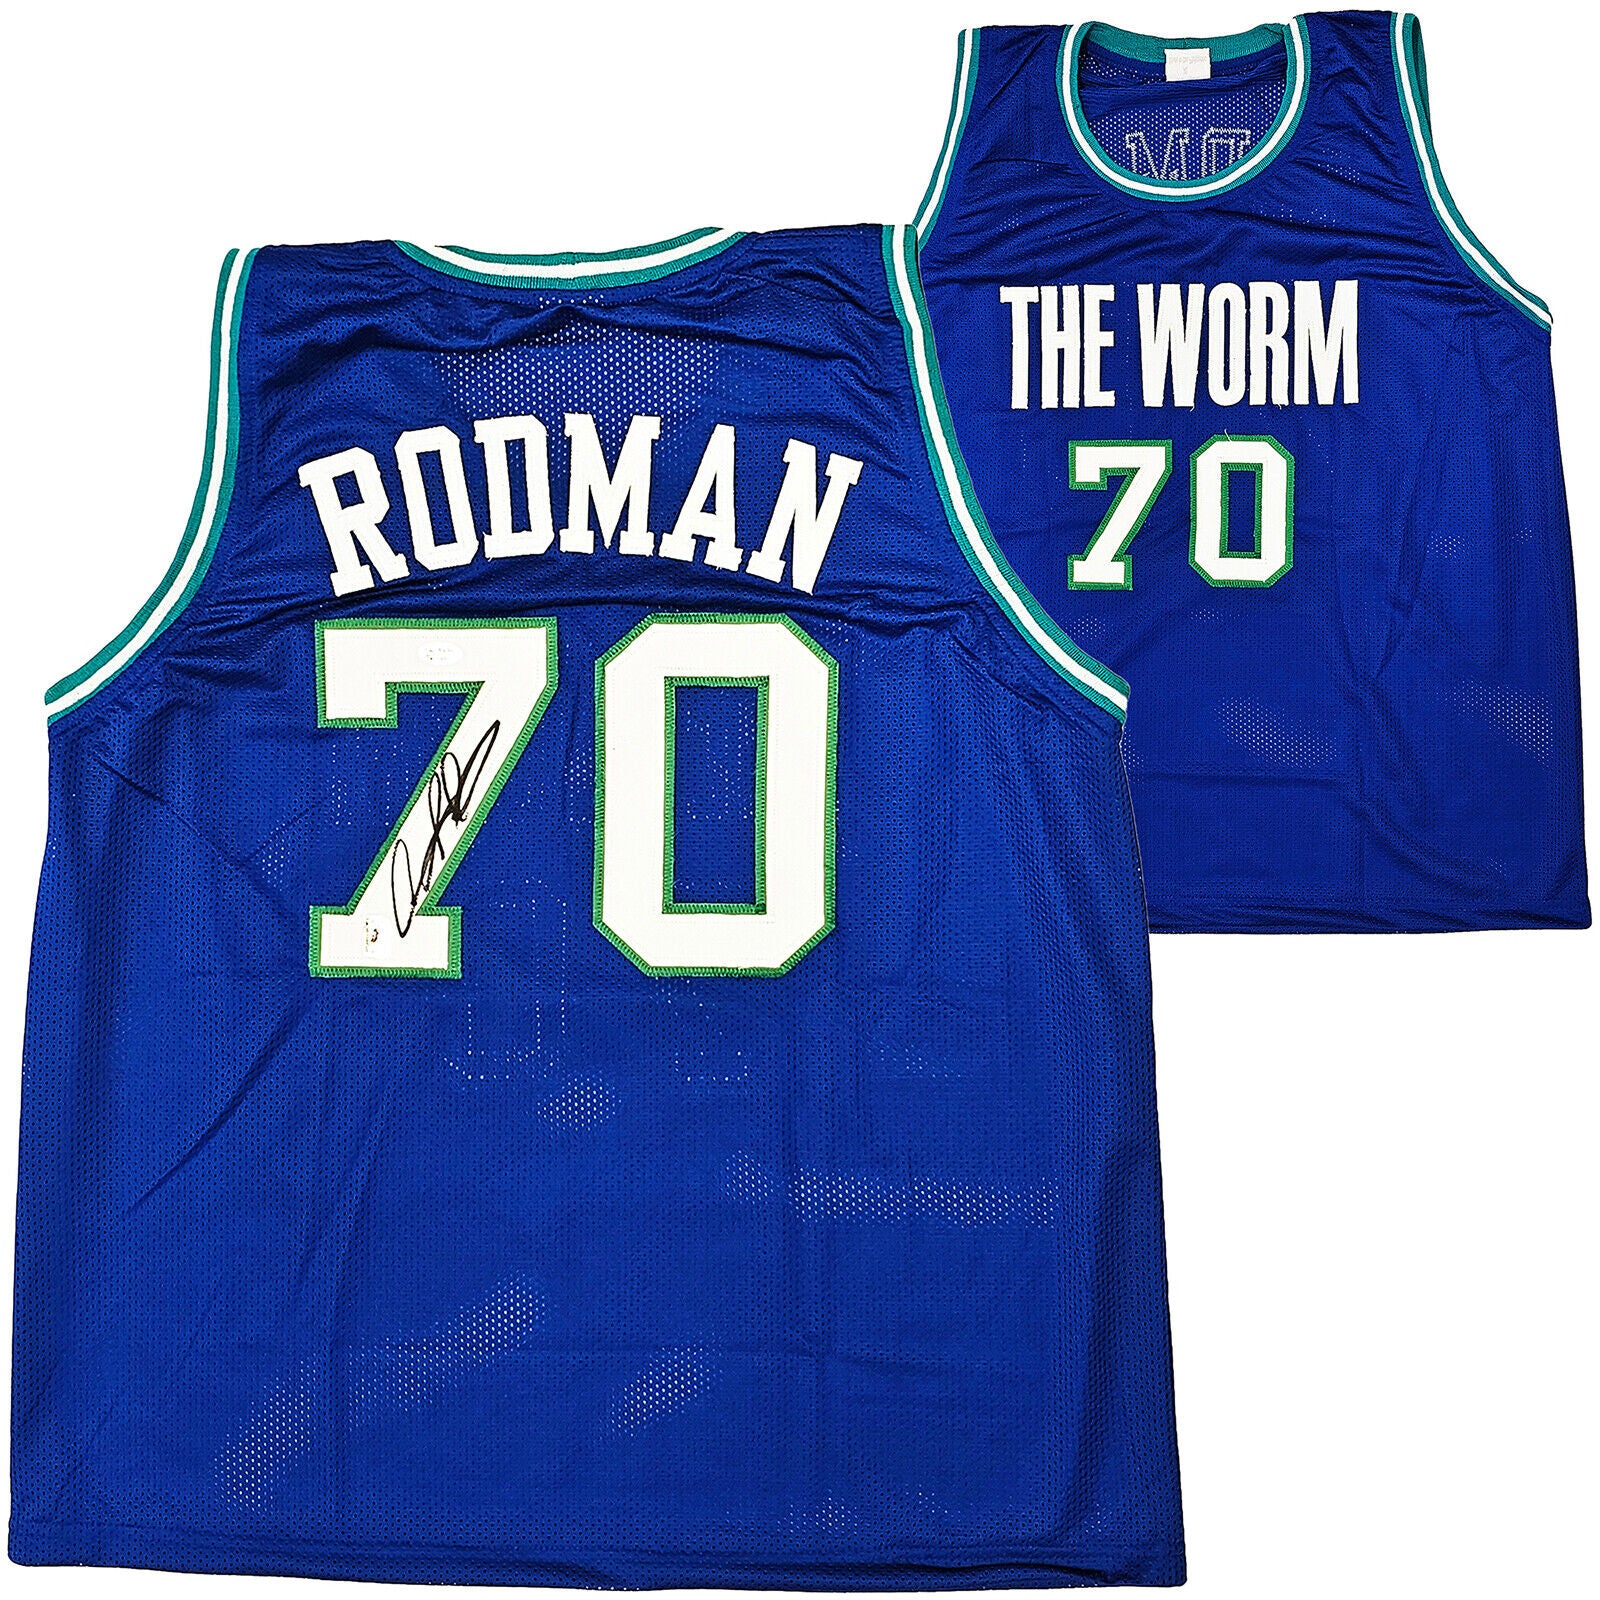 At Auction: Dennis Rodman Signed The Worm Jersey (JSA)